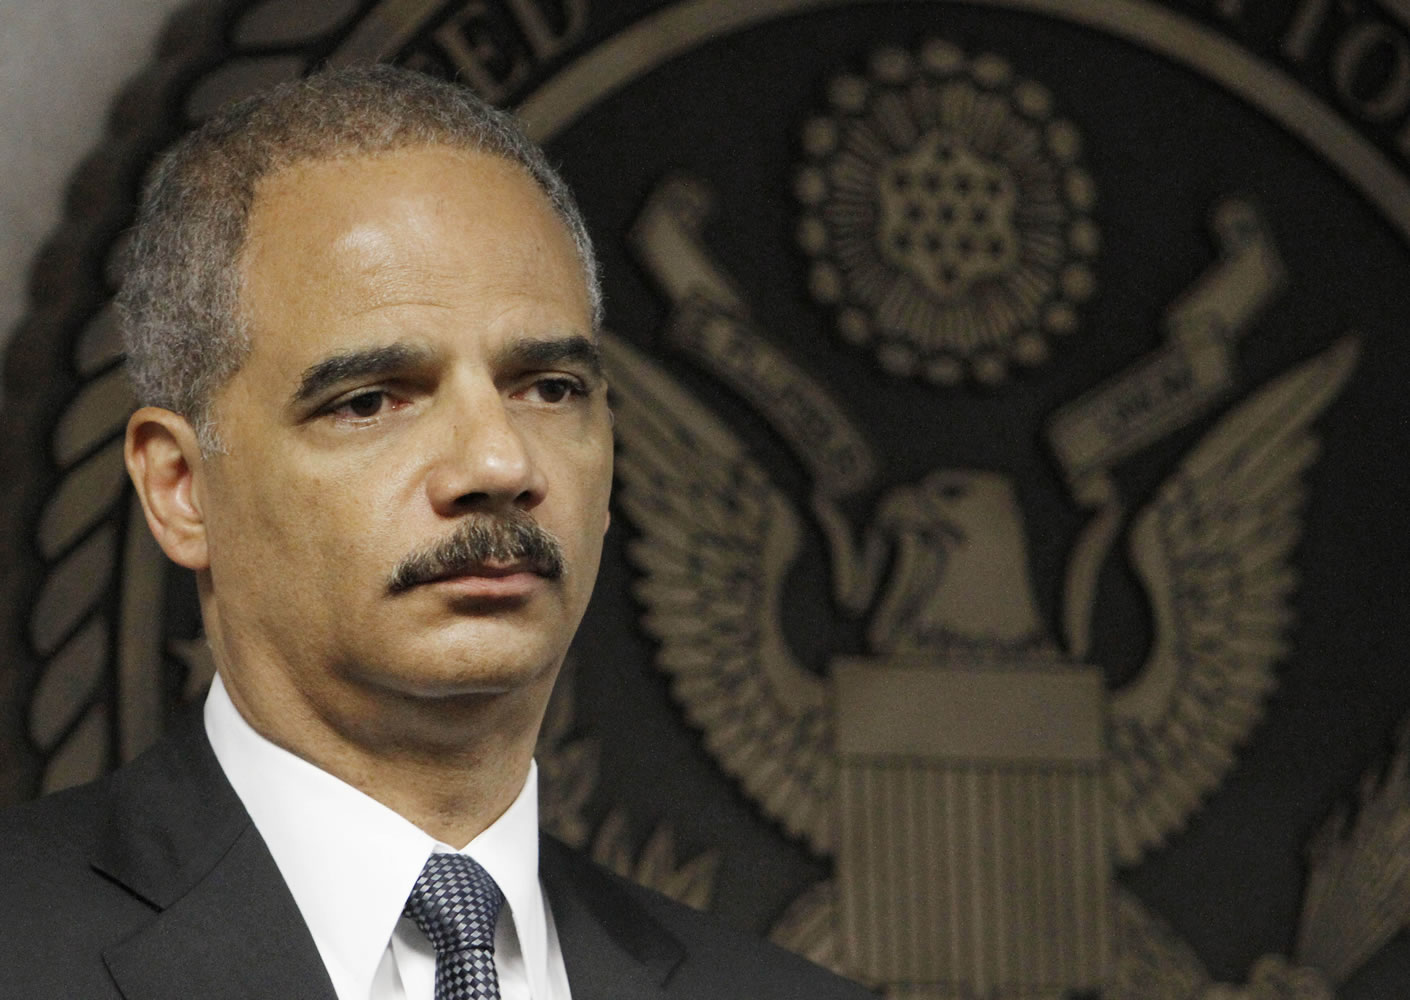 Attorney General Eric Holder takes part in news conference in Miami.